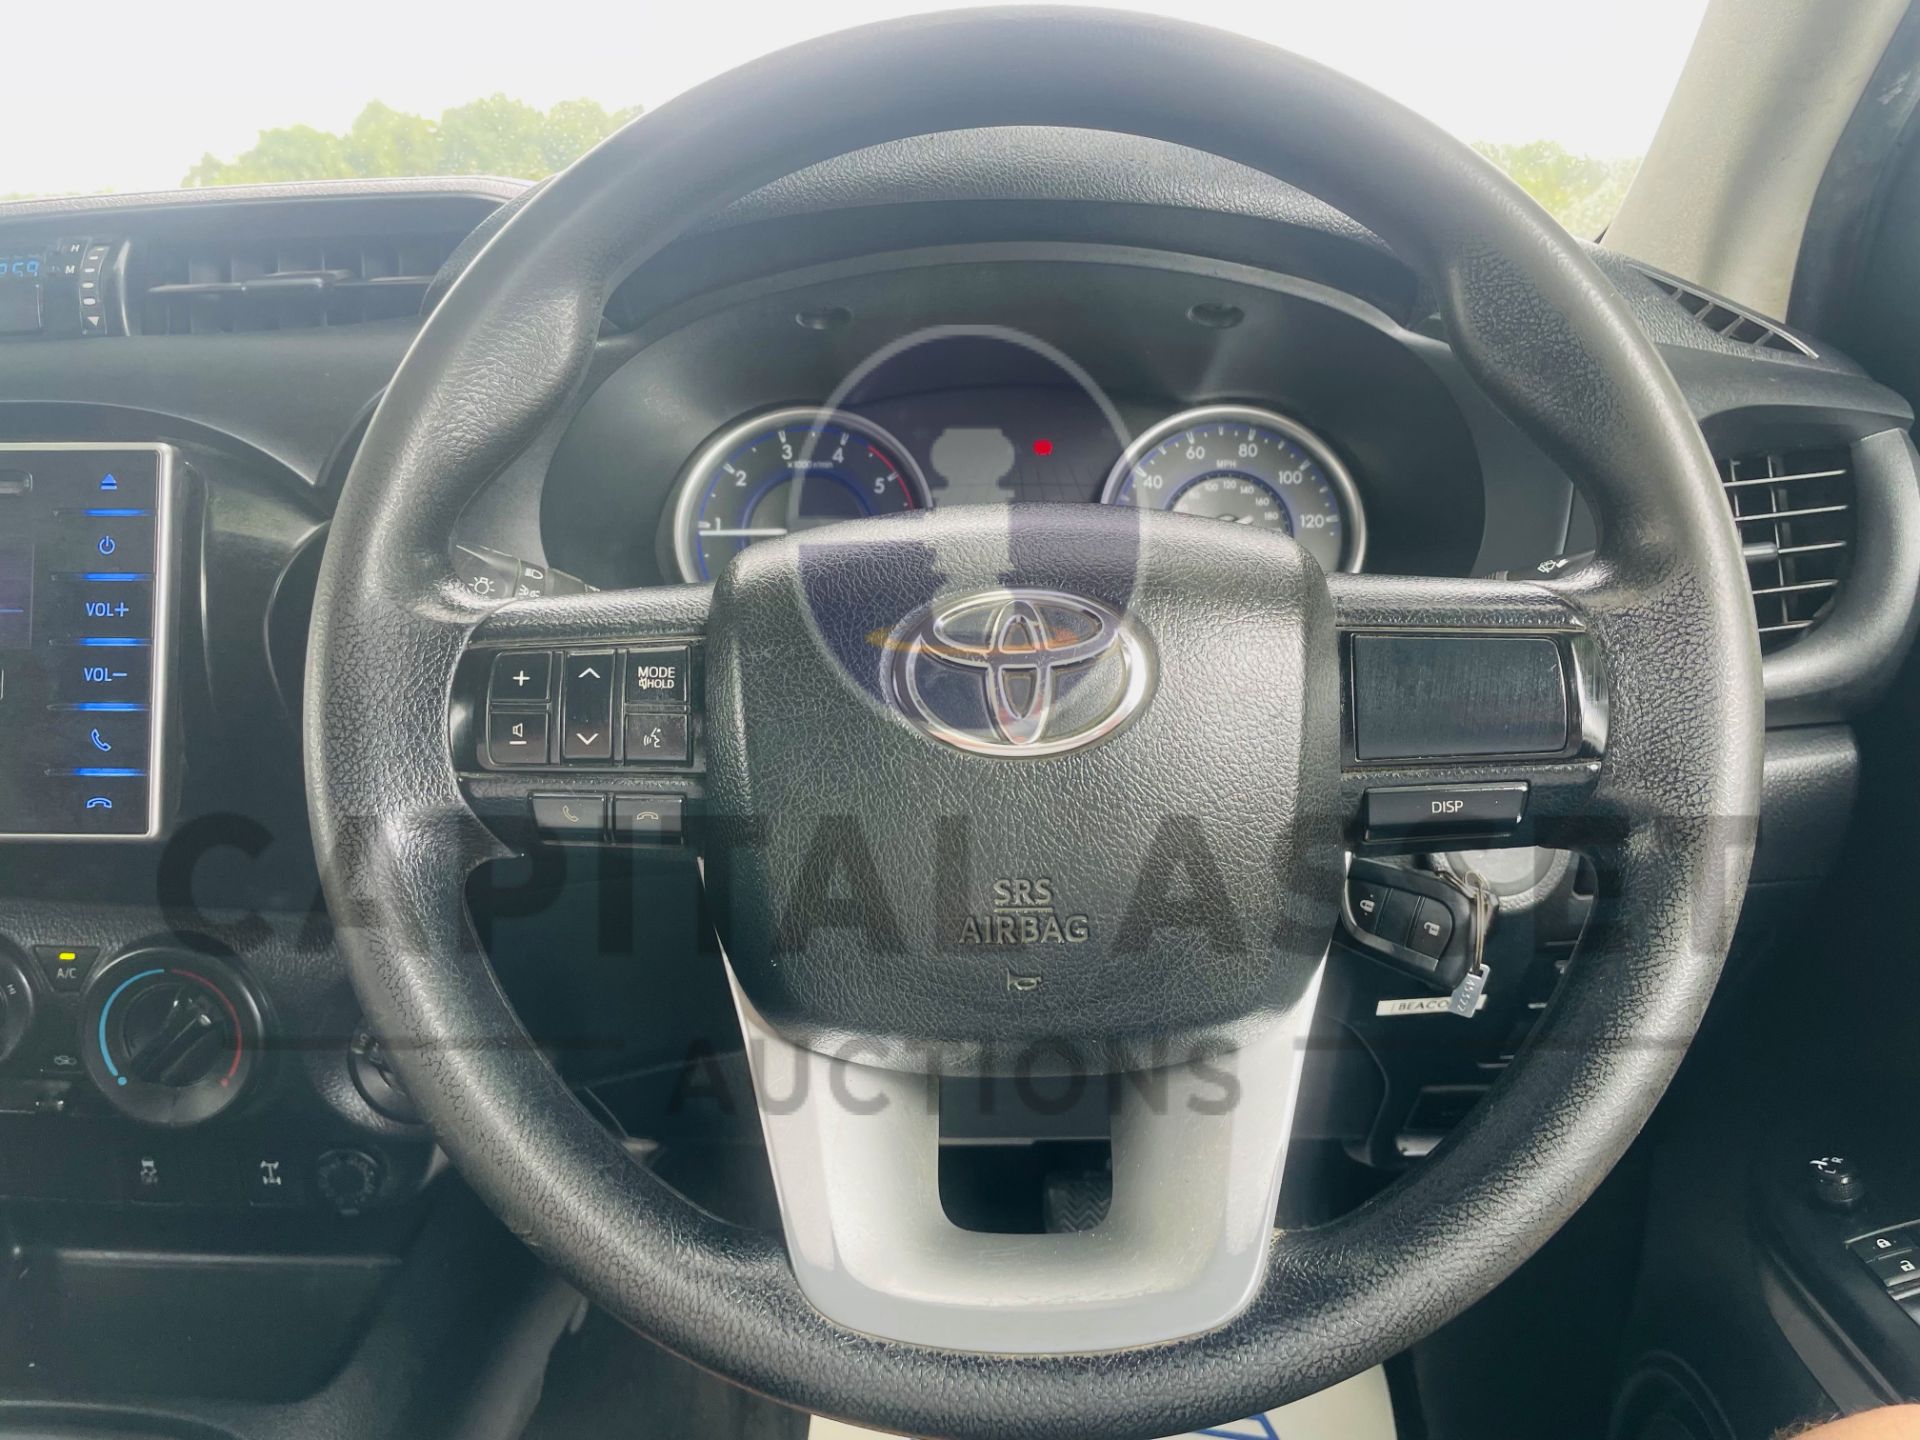 TOYOTA HILUX *DOUBLE CAB PICK-UP* (2018 - EURO 6) 2.4 D4-D - 6 SPEED (1 OWNER) *ULTRA LOW MILES* - Image 39 of 40